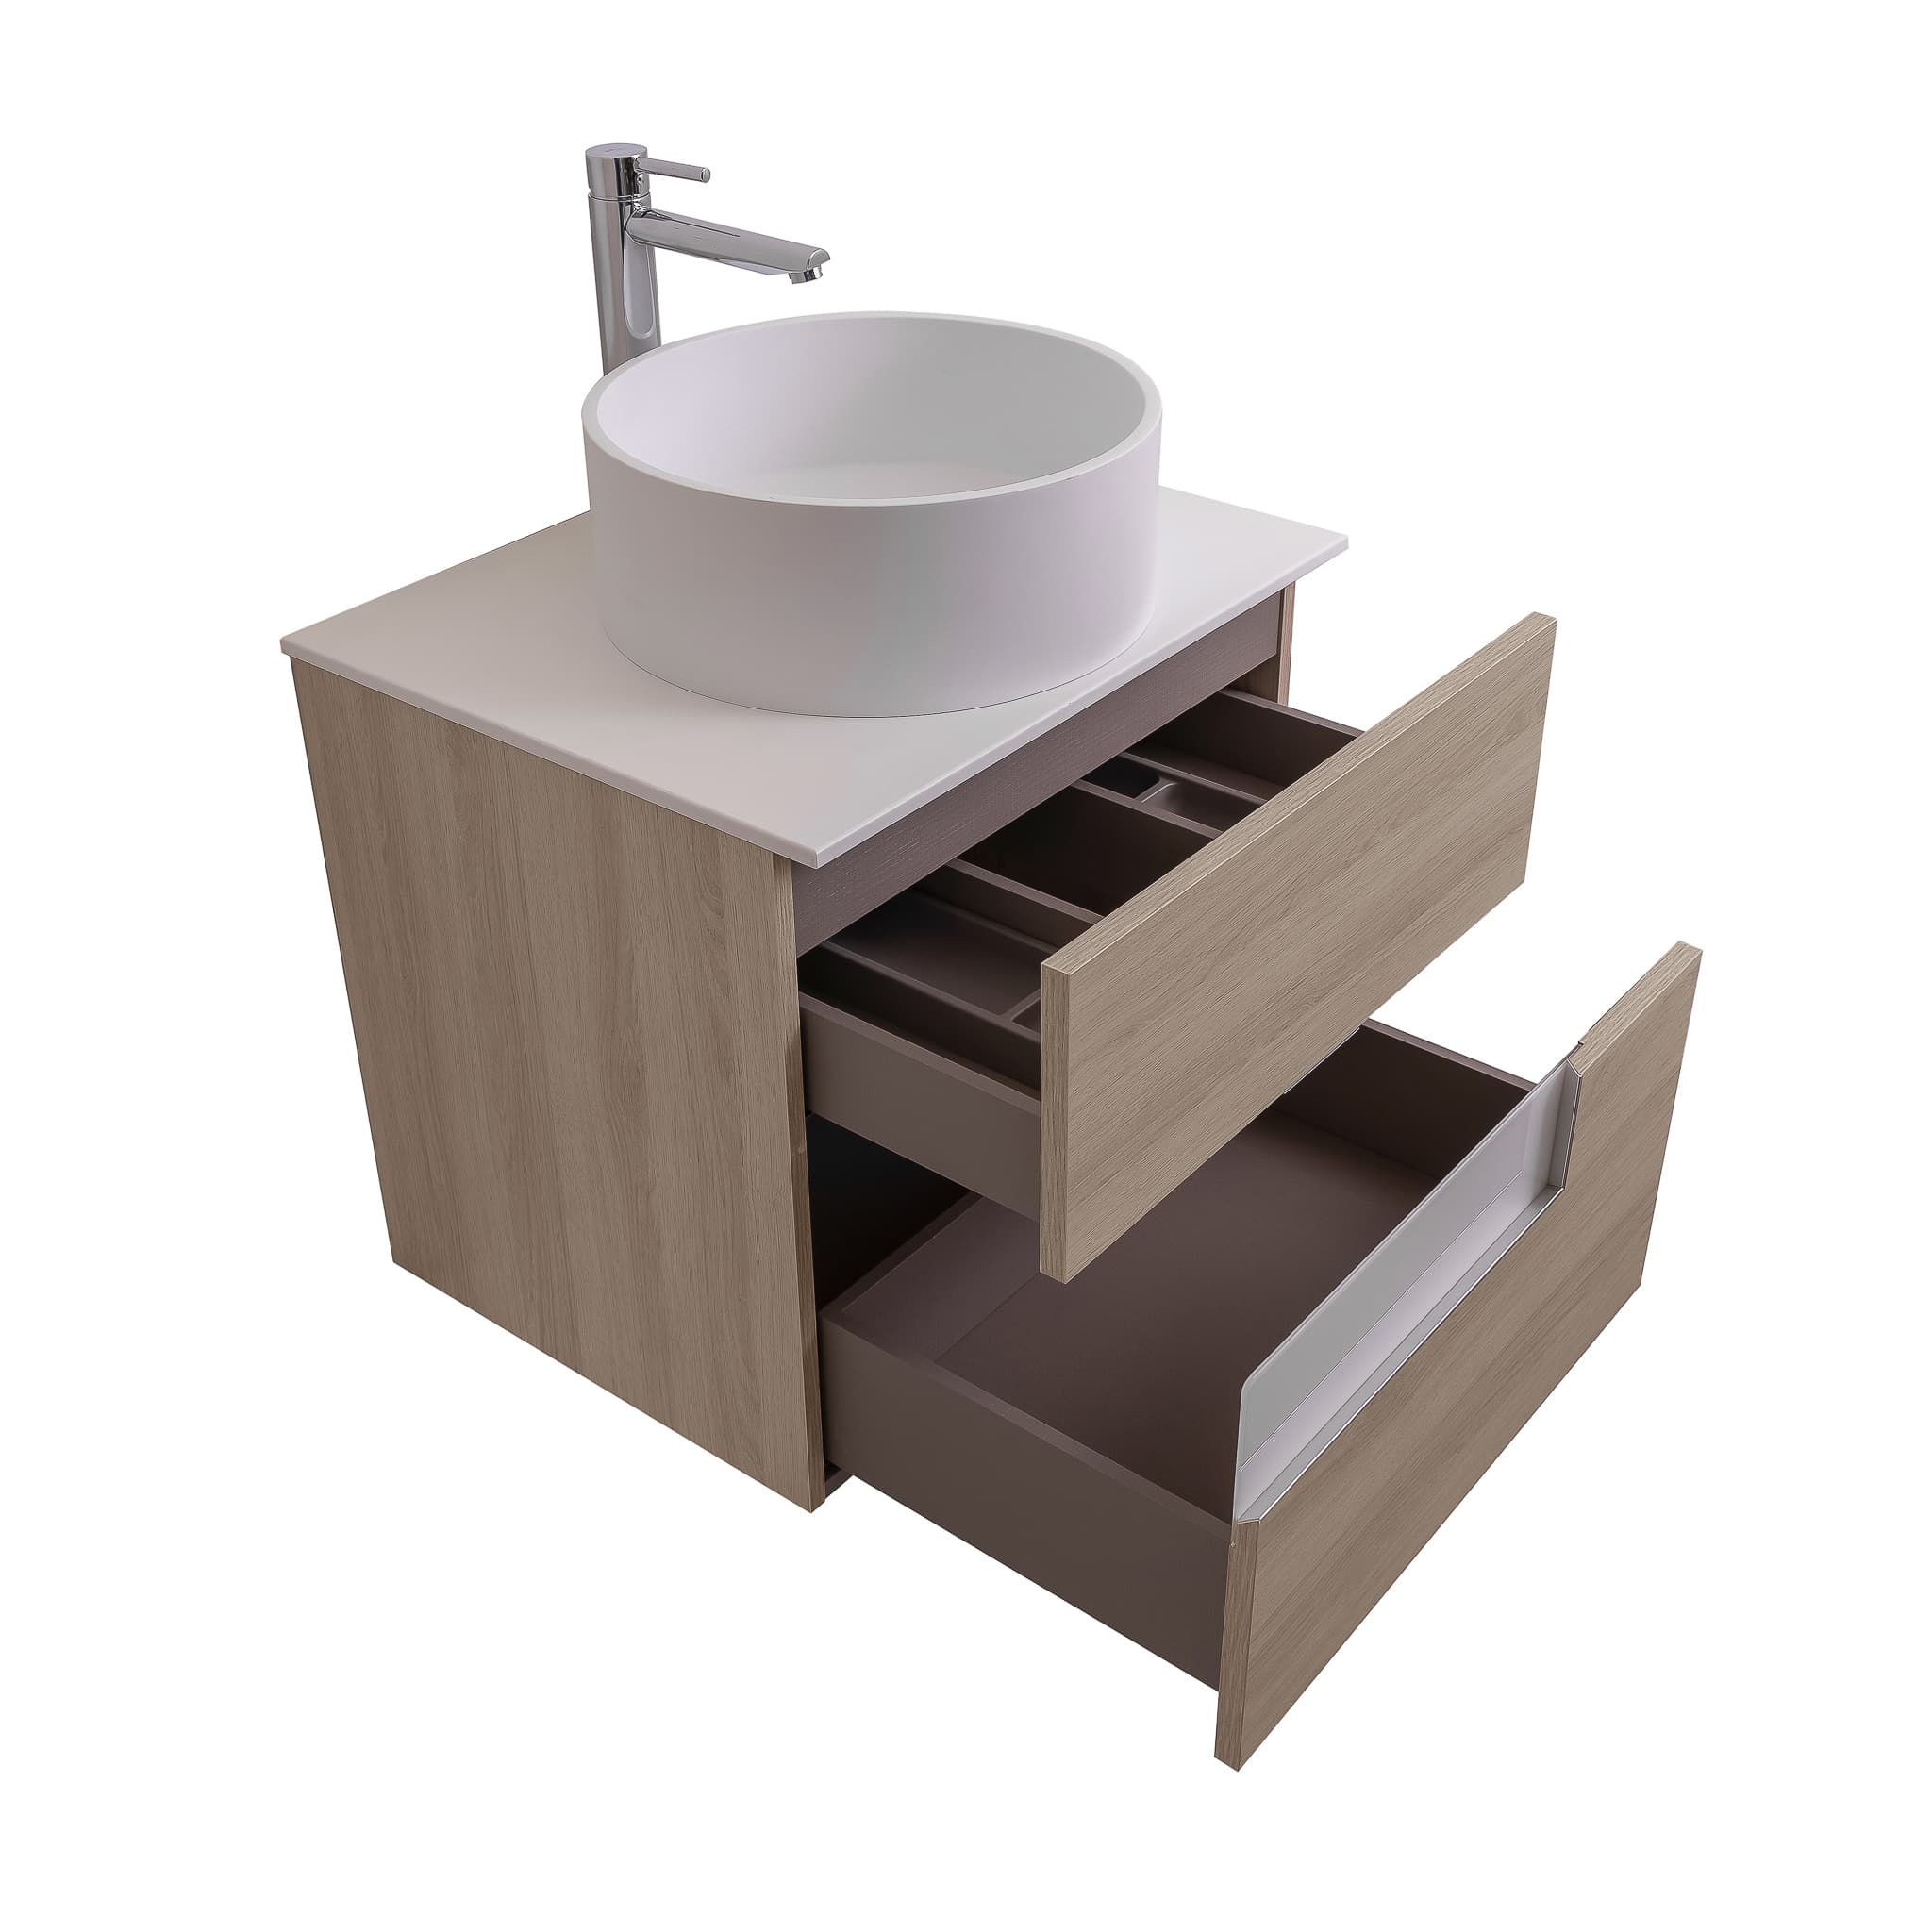 Vision 23.5 Natural Light Wood Cabinet, Solid Surface Flat White Counter And Round Solid Surface White Basin 1386, Wall Mounted Modern Vanity Set